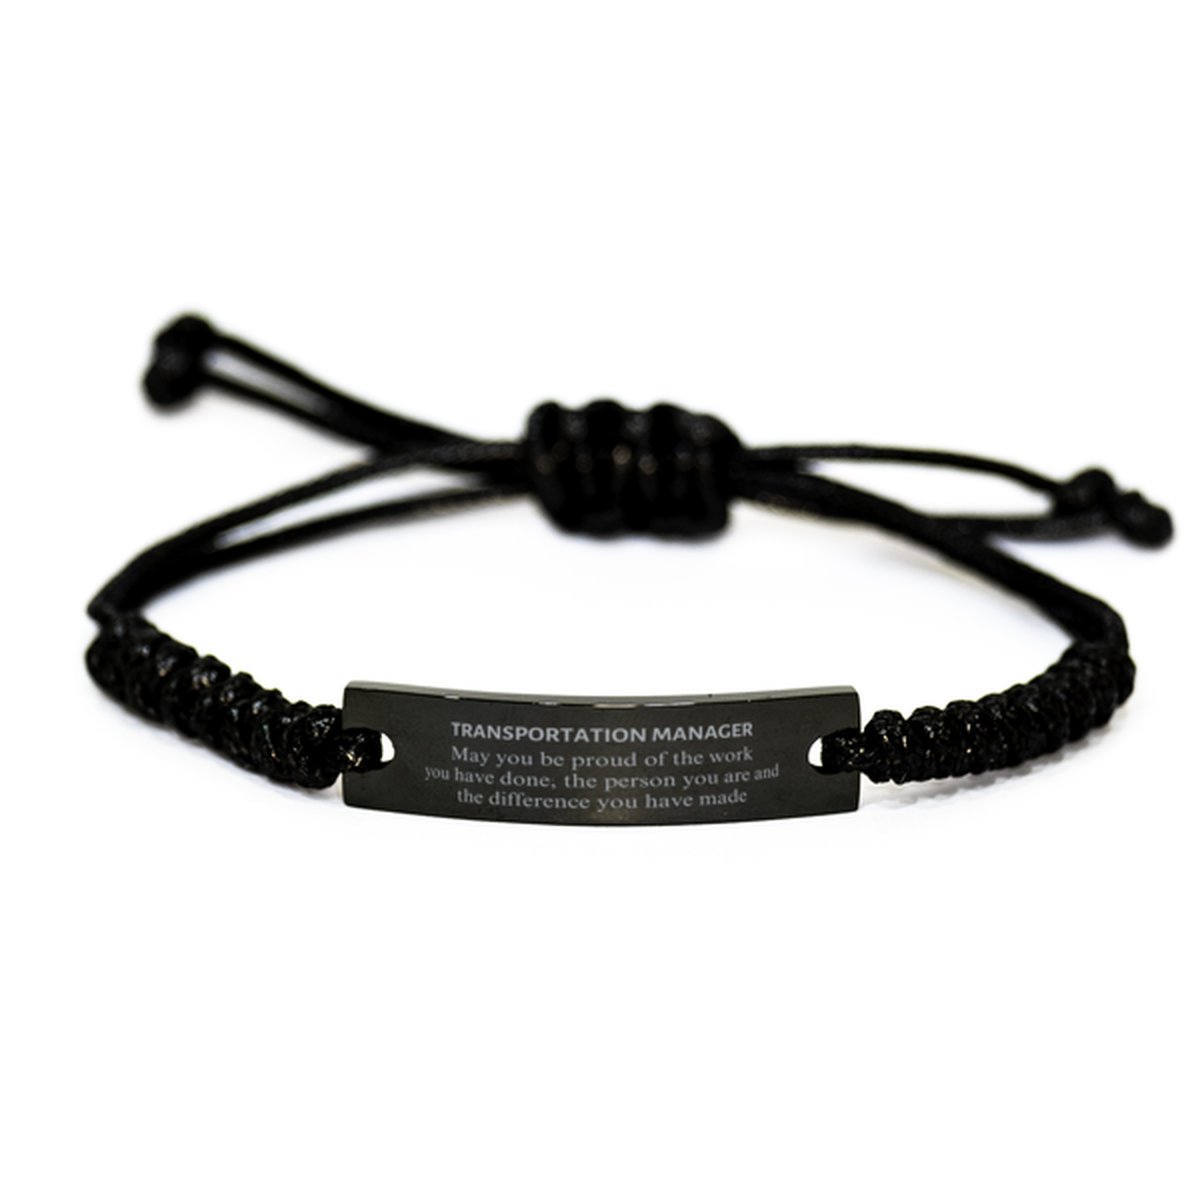 Transportation Manager May you be proud of the work you have done, Retirement Transportation Manager Black Rope Bracelet for Colleague Appreciation Gifts Amazing for Transportation Manager